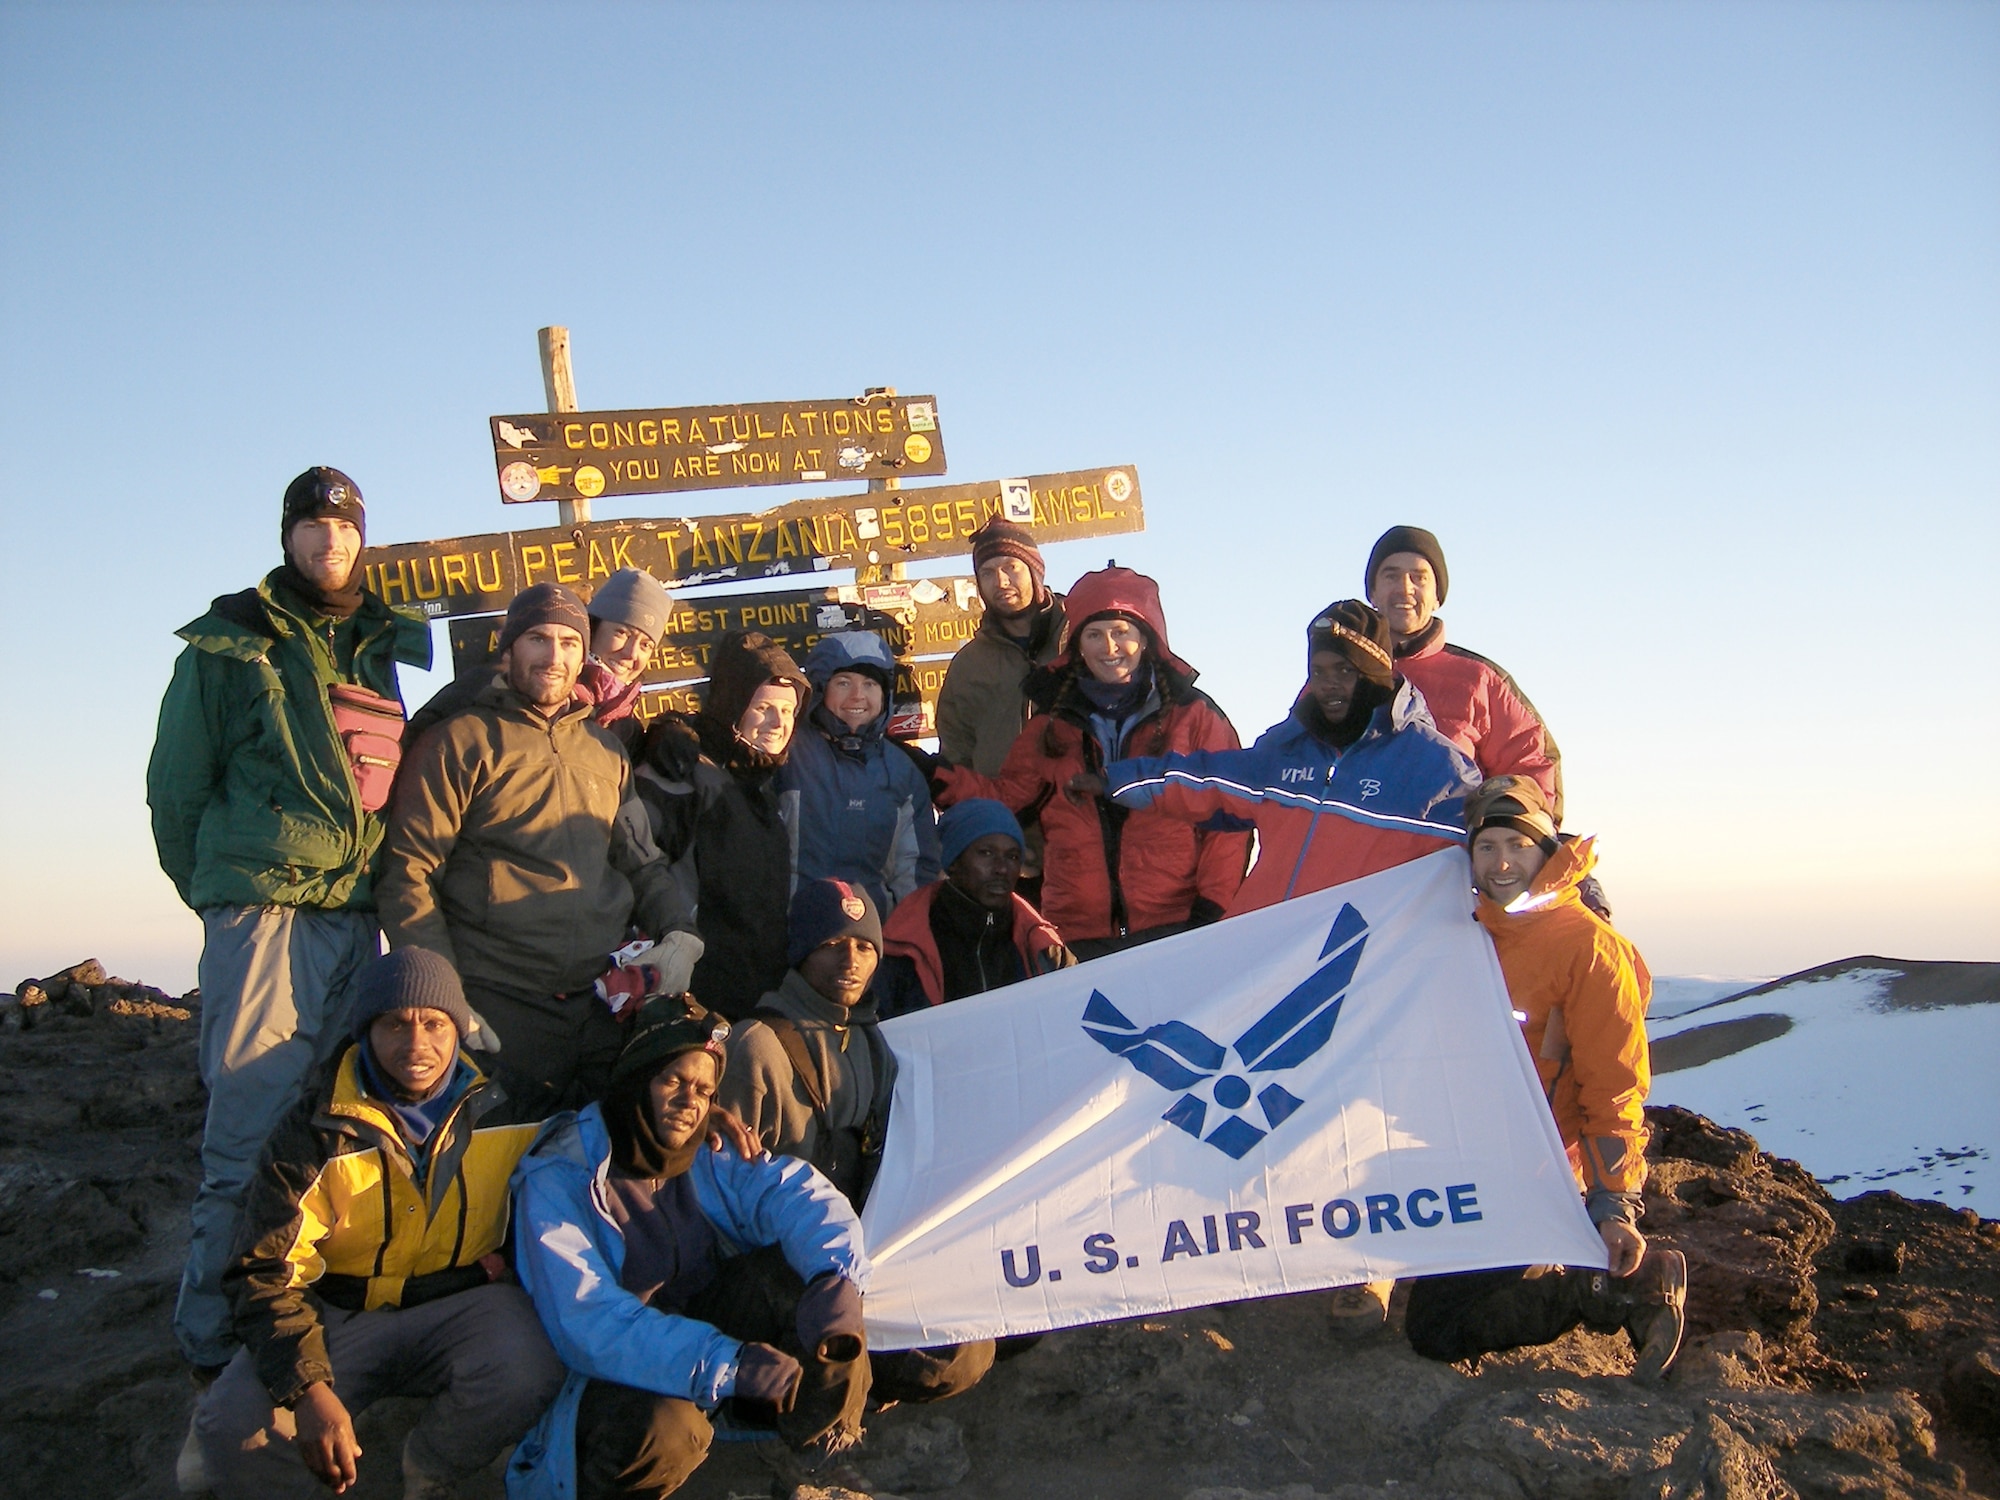 Capt. Graydon Muller (far left, standing), and Capt. Rob Marshall (far right, kneeling) pose at the summit of Mt. Kilimanjaro, the highest peak in Africa, as part of the U.S. Air Force Seven Summits Challenge in July 2006. The U.S. Air Force Seven Summits Challenge is an endeavor for Air Force members to carry the Air Force flag to the highest point on each continent and to be the first U.S. military group to conquer all seven peaks. Captains Muller and Marshall will depart Nov. 24, 2010 to attempt the group?s fifth summit, Vinson Massif in Antarctica. Captain Muller is a member of the 6th Special Operations Squadron. Captain Marshall is a member of the 8th Special Operations Squadron. (U.S. Air Force photo) 